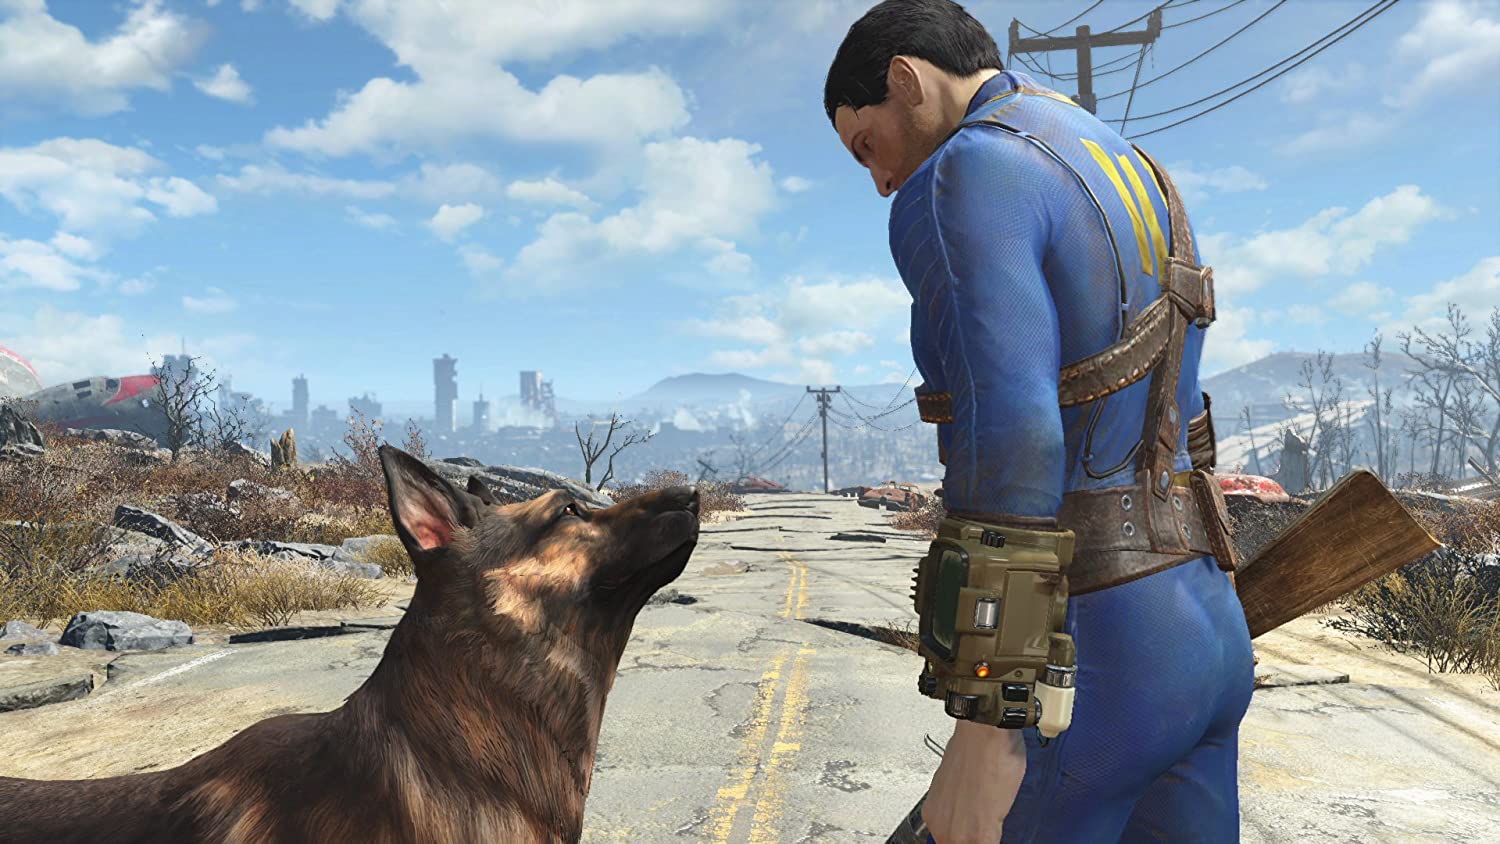 Fallout 4: Game of the Year Edition - (XB1) Xbox One Video Games Bethesda Softworks   